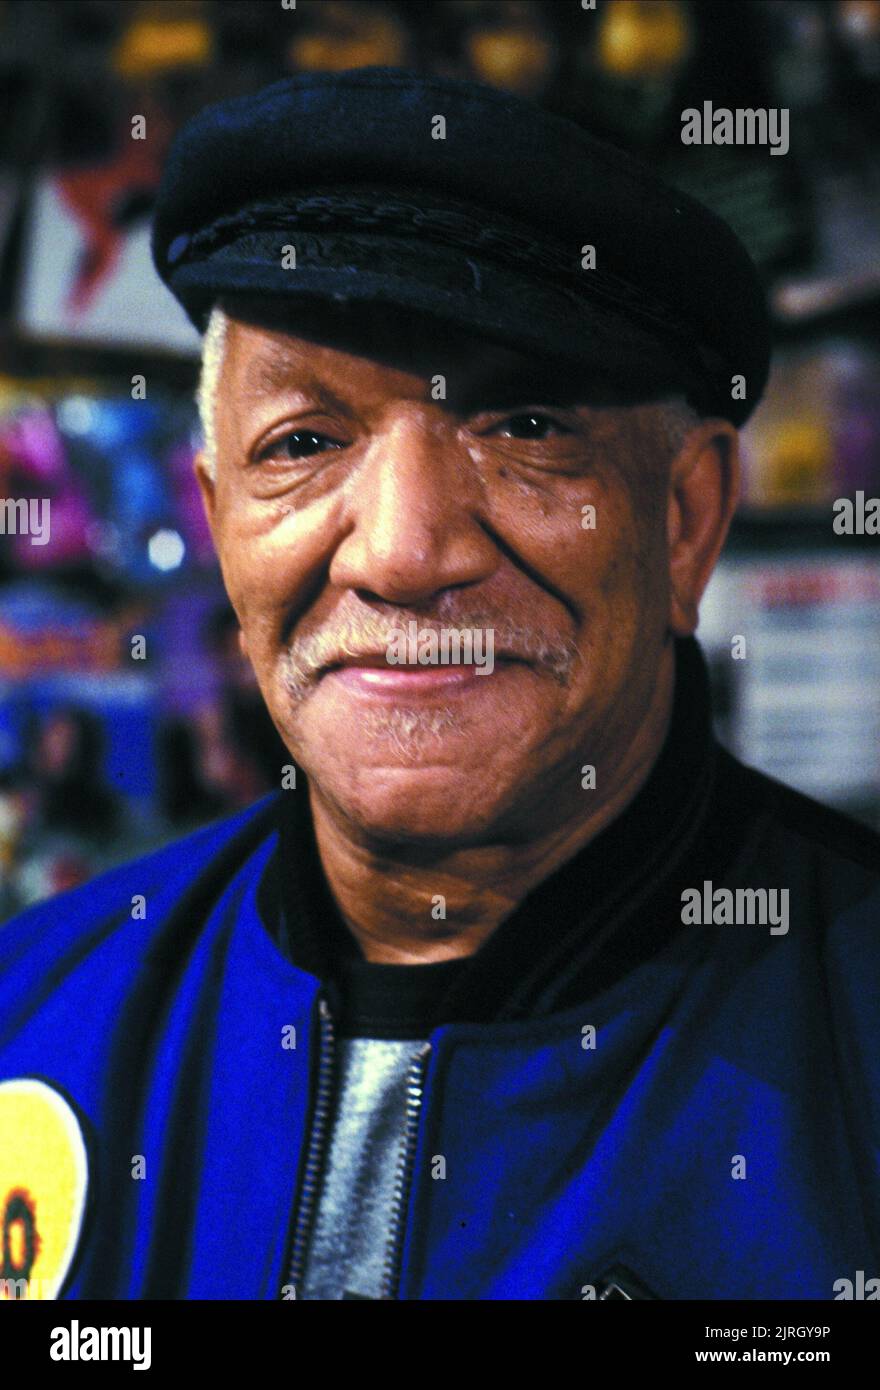 REDD FOXX, GHOST OF A CHANCE, 1987 Stock Photo